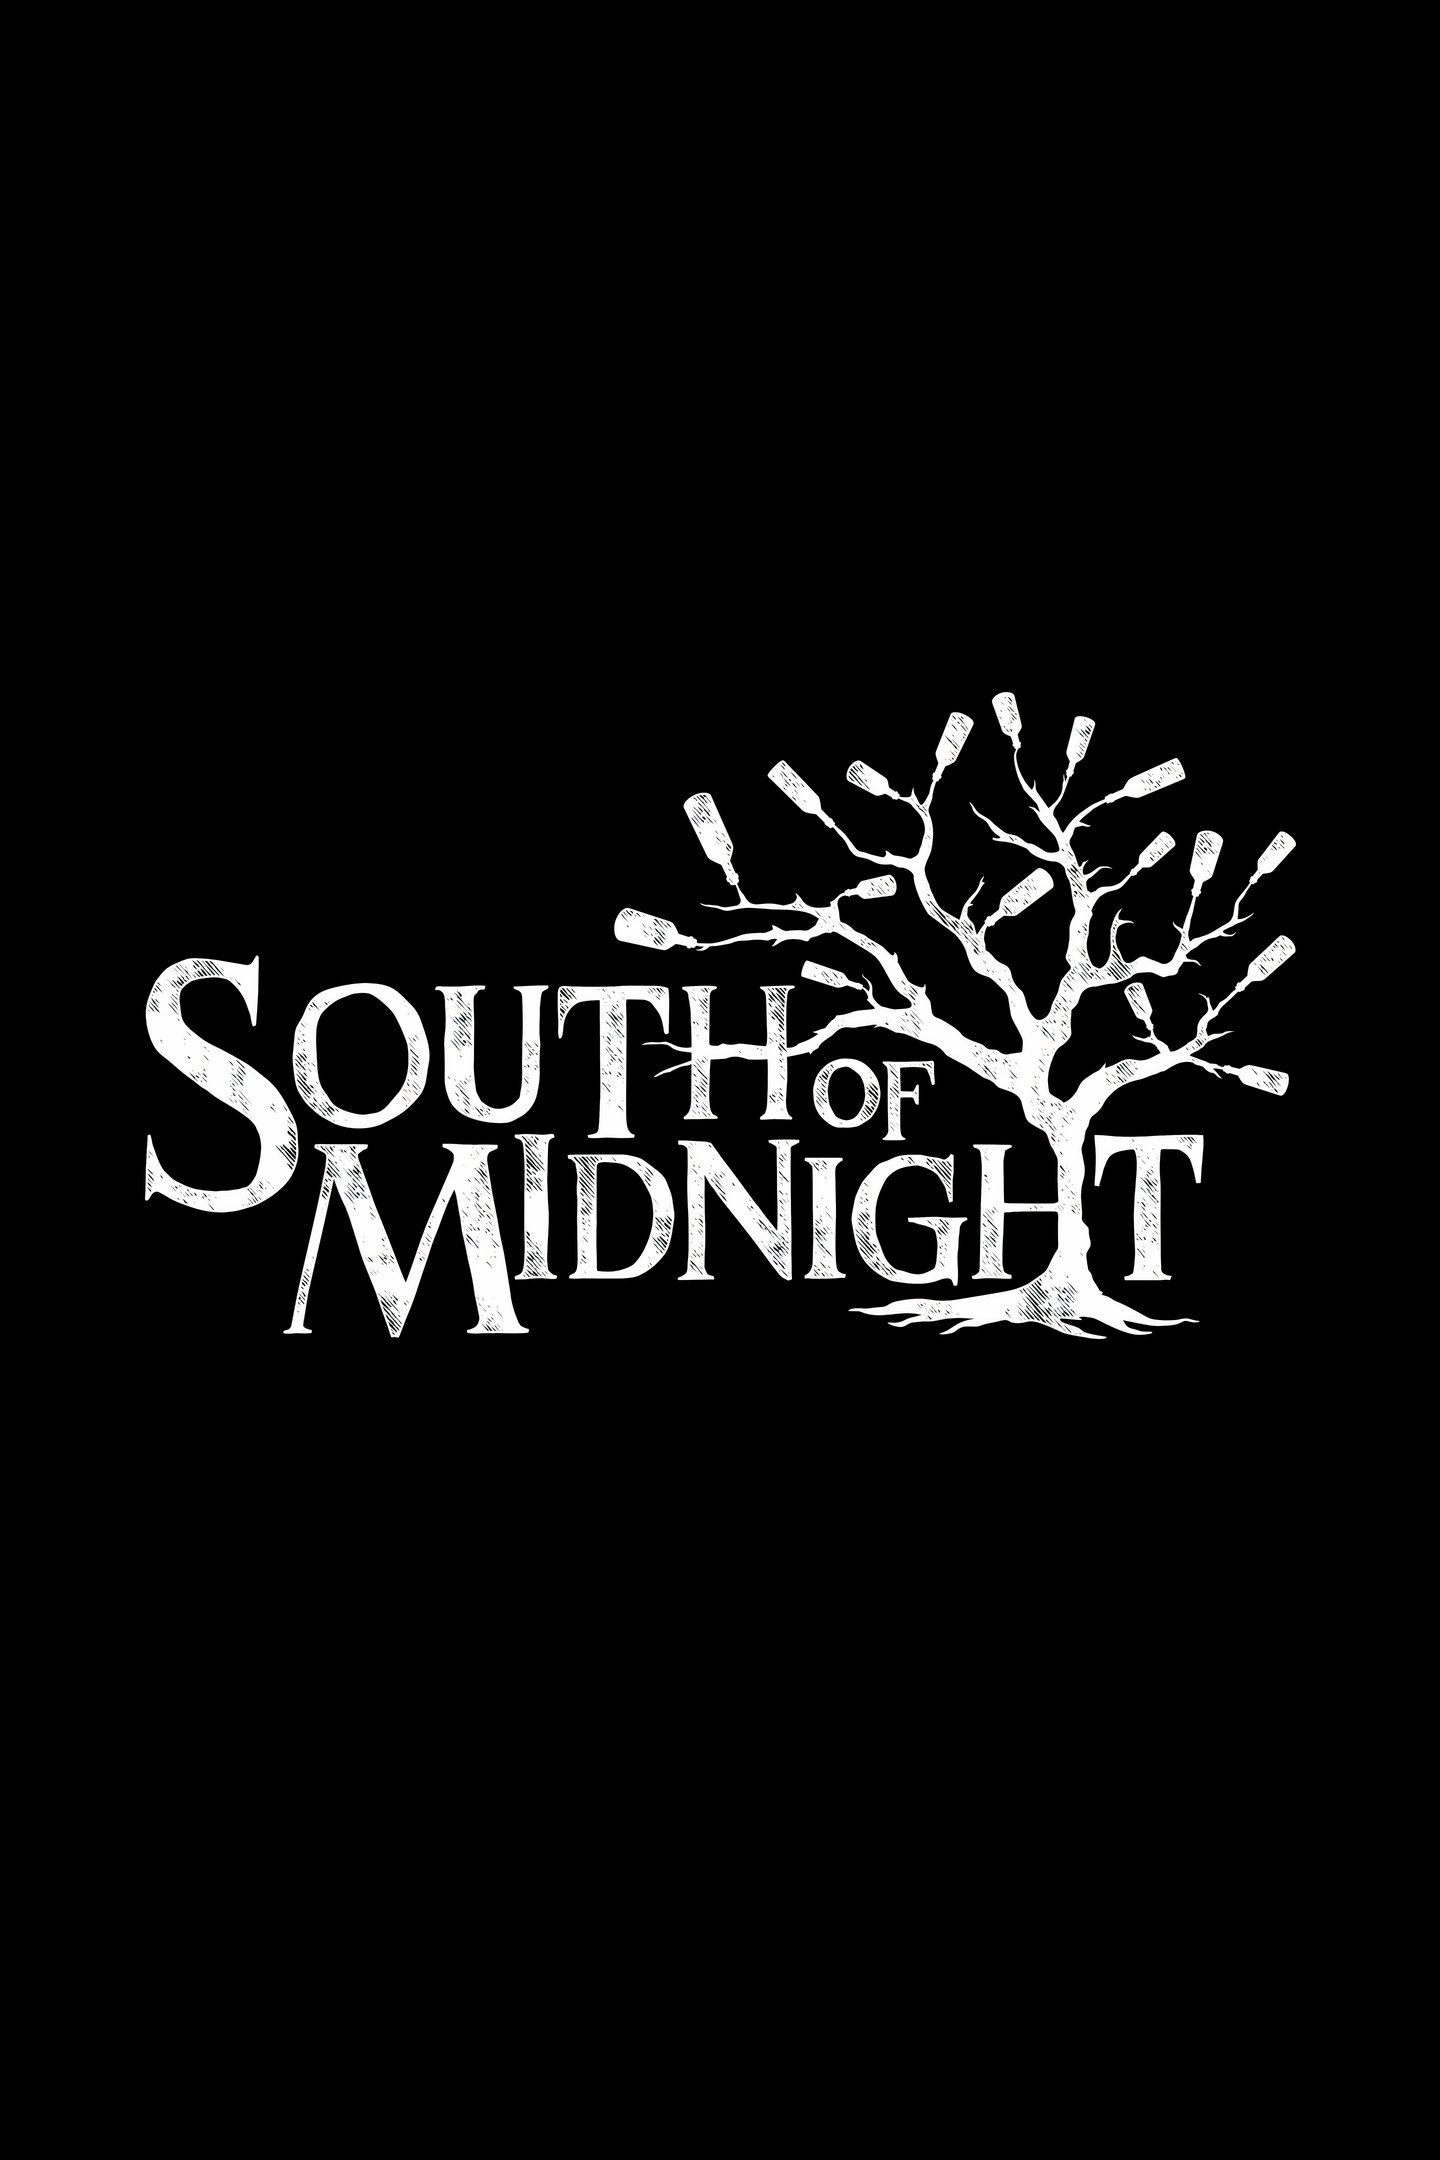 SOUTH OF MIDNIGHT